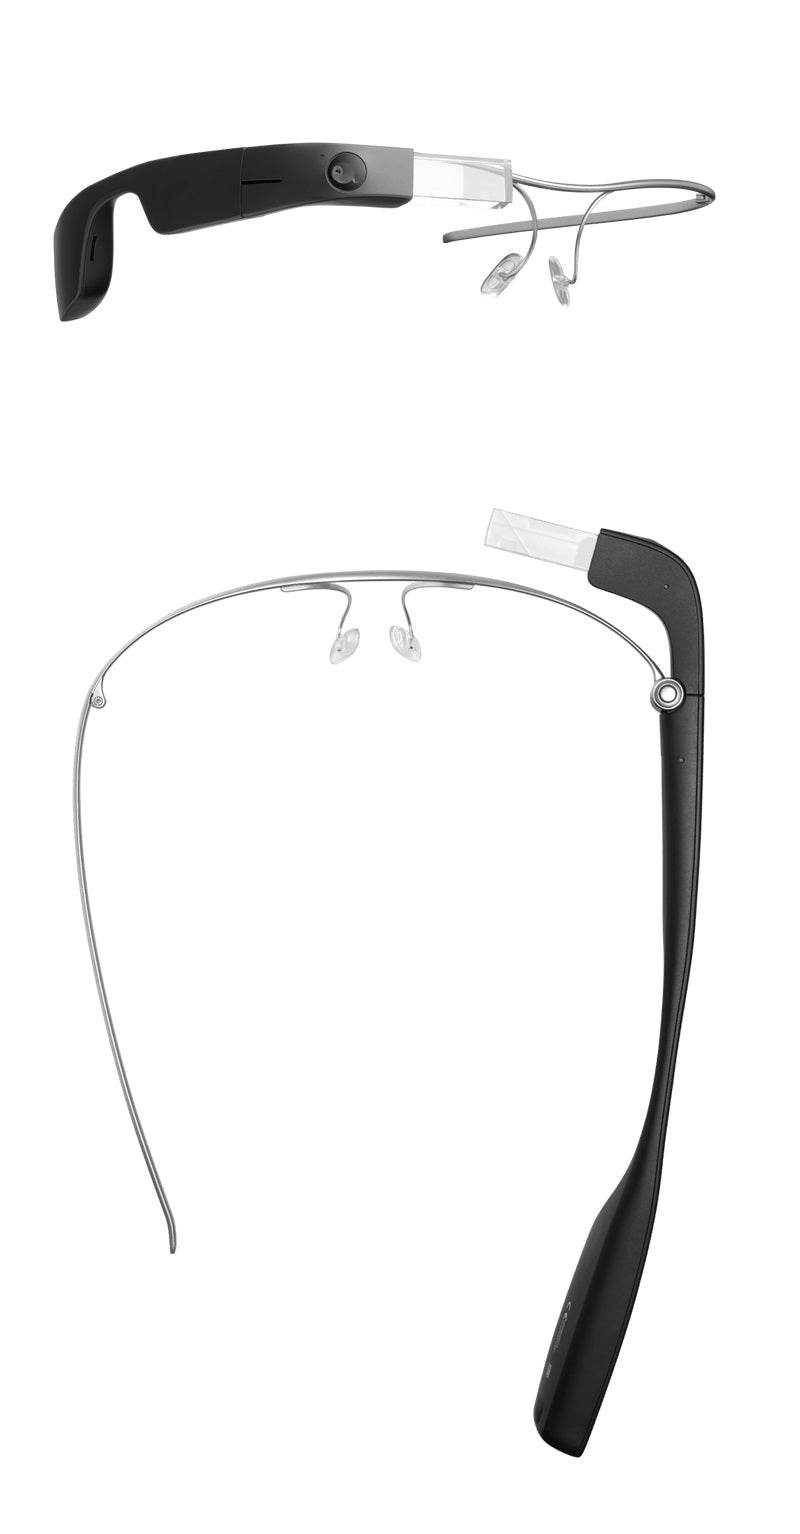 Lightweight glasses, with a camera and direct speaker, Envision Glasses speak out text and environmental information, recognizes faces, light, and colors, and lets you share that information.